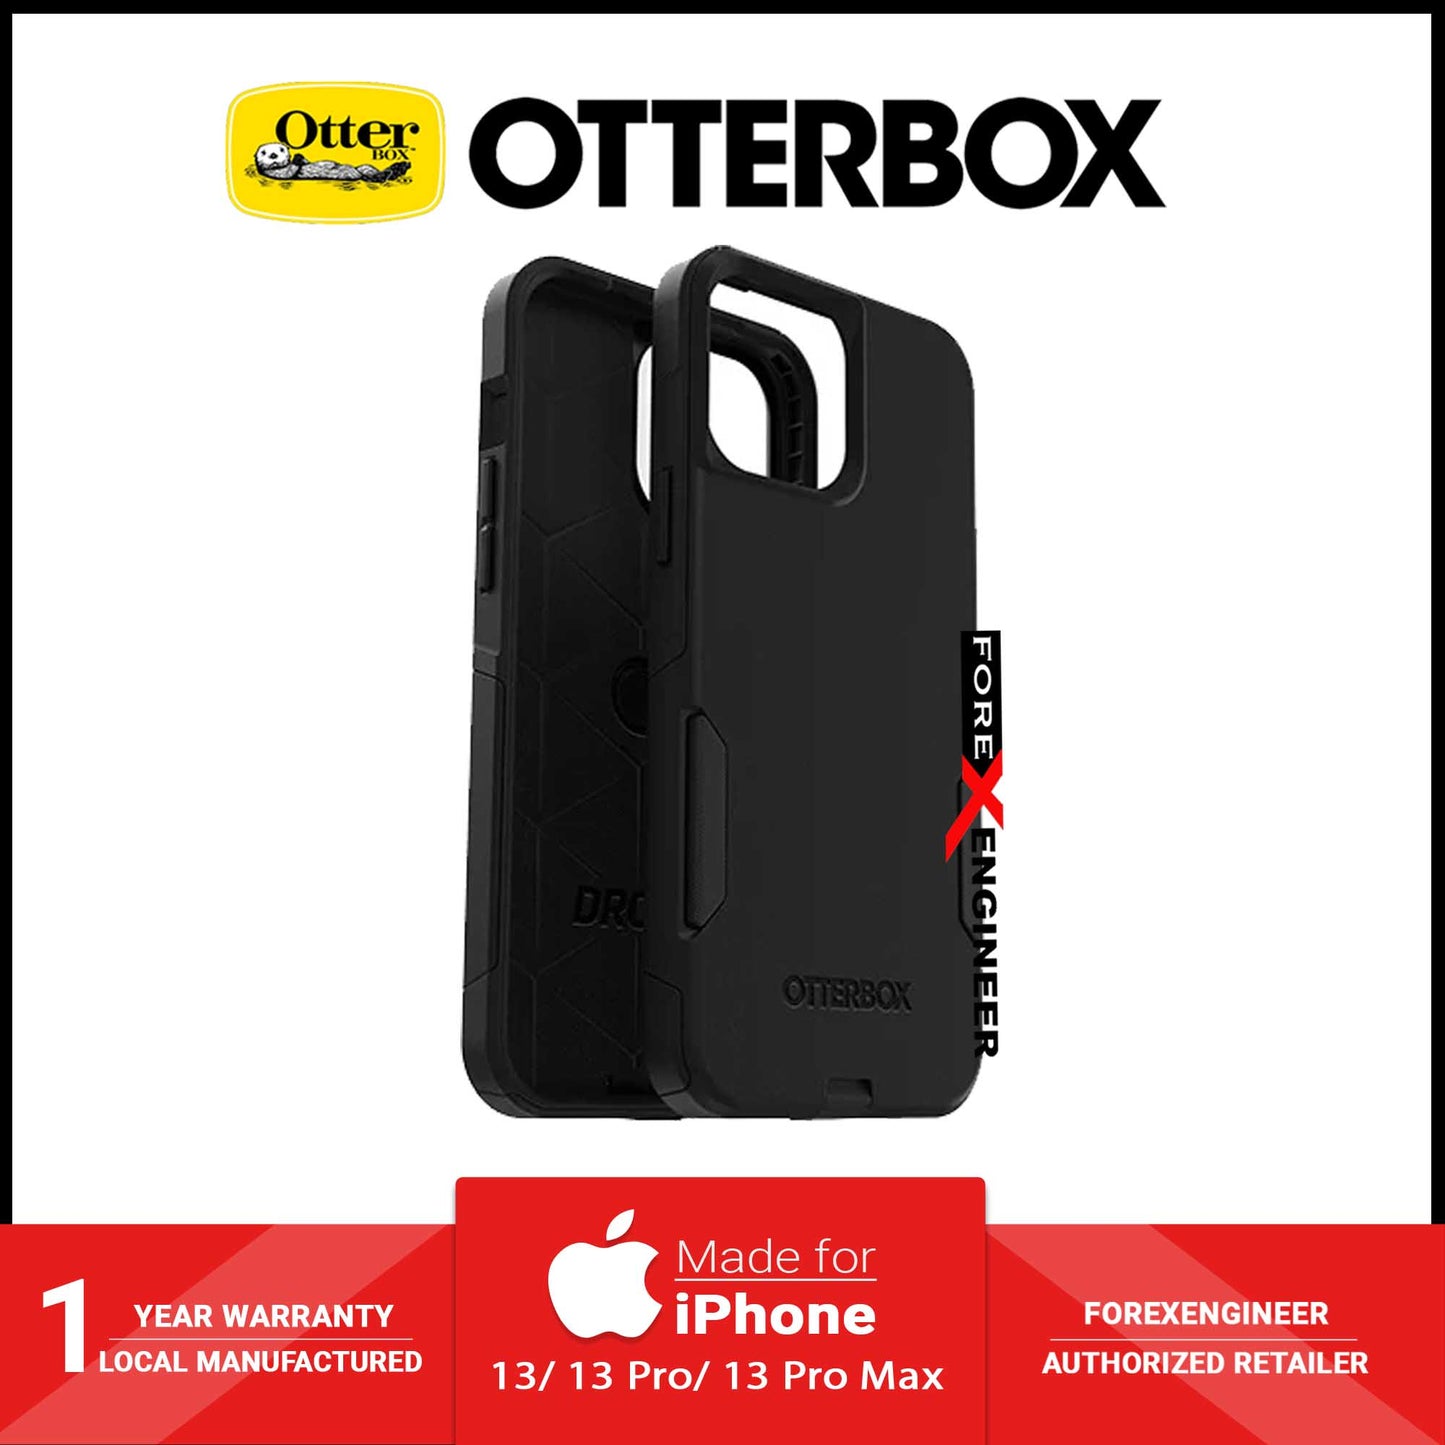 Otterbox Commuter for iPhone 13 Pro 6.1" 5G - Antimicrobial Case - Black (Barcode: 840104264683)